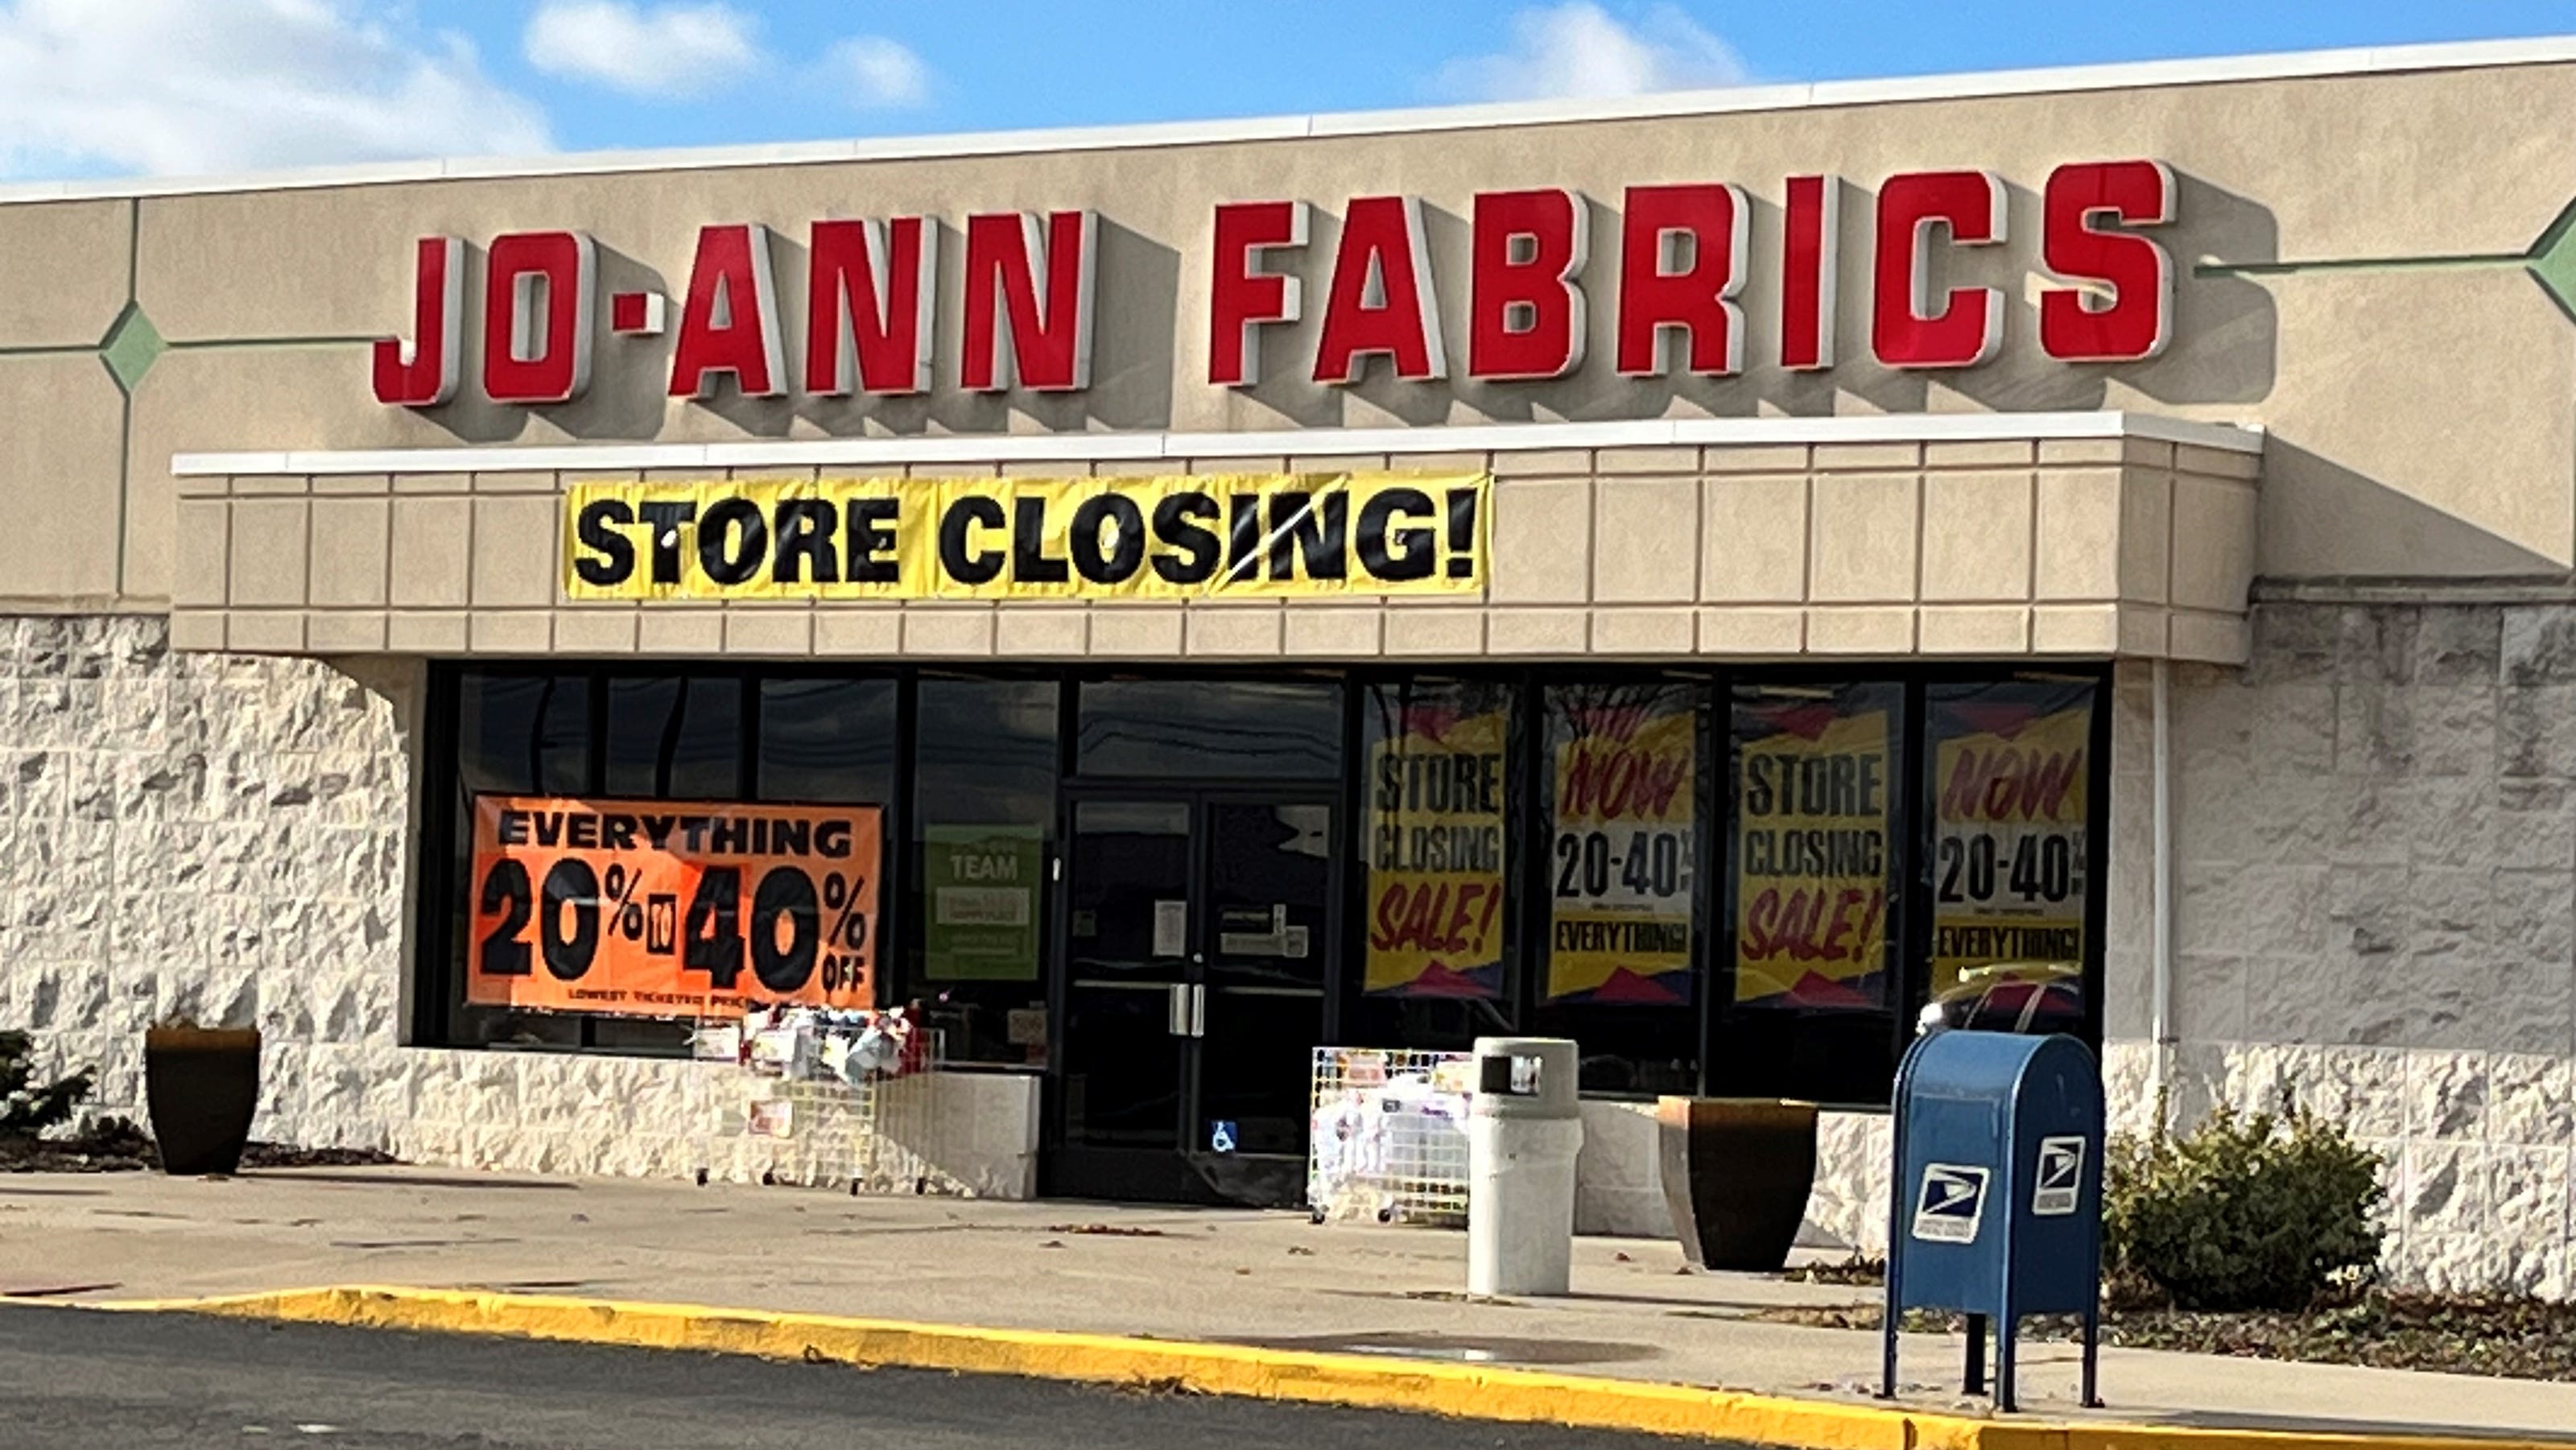  JoAnn Fabrics store at Marion Centre mall to close in January 2023 